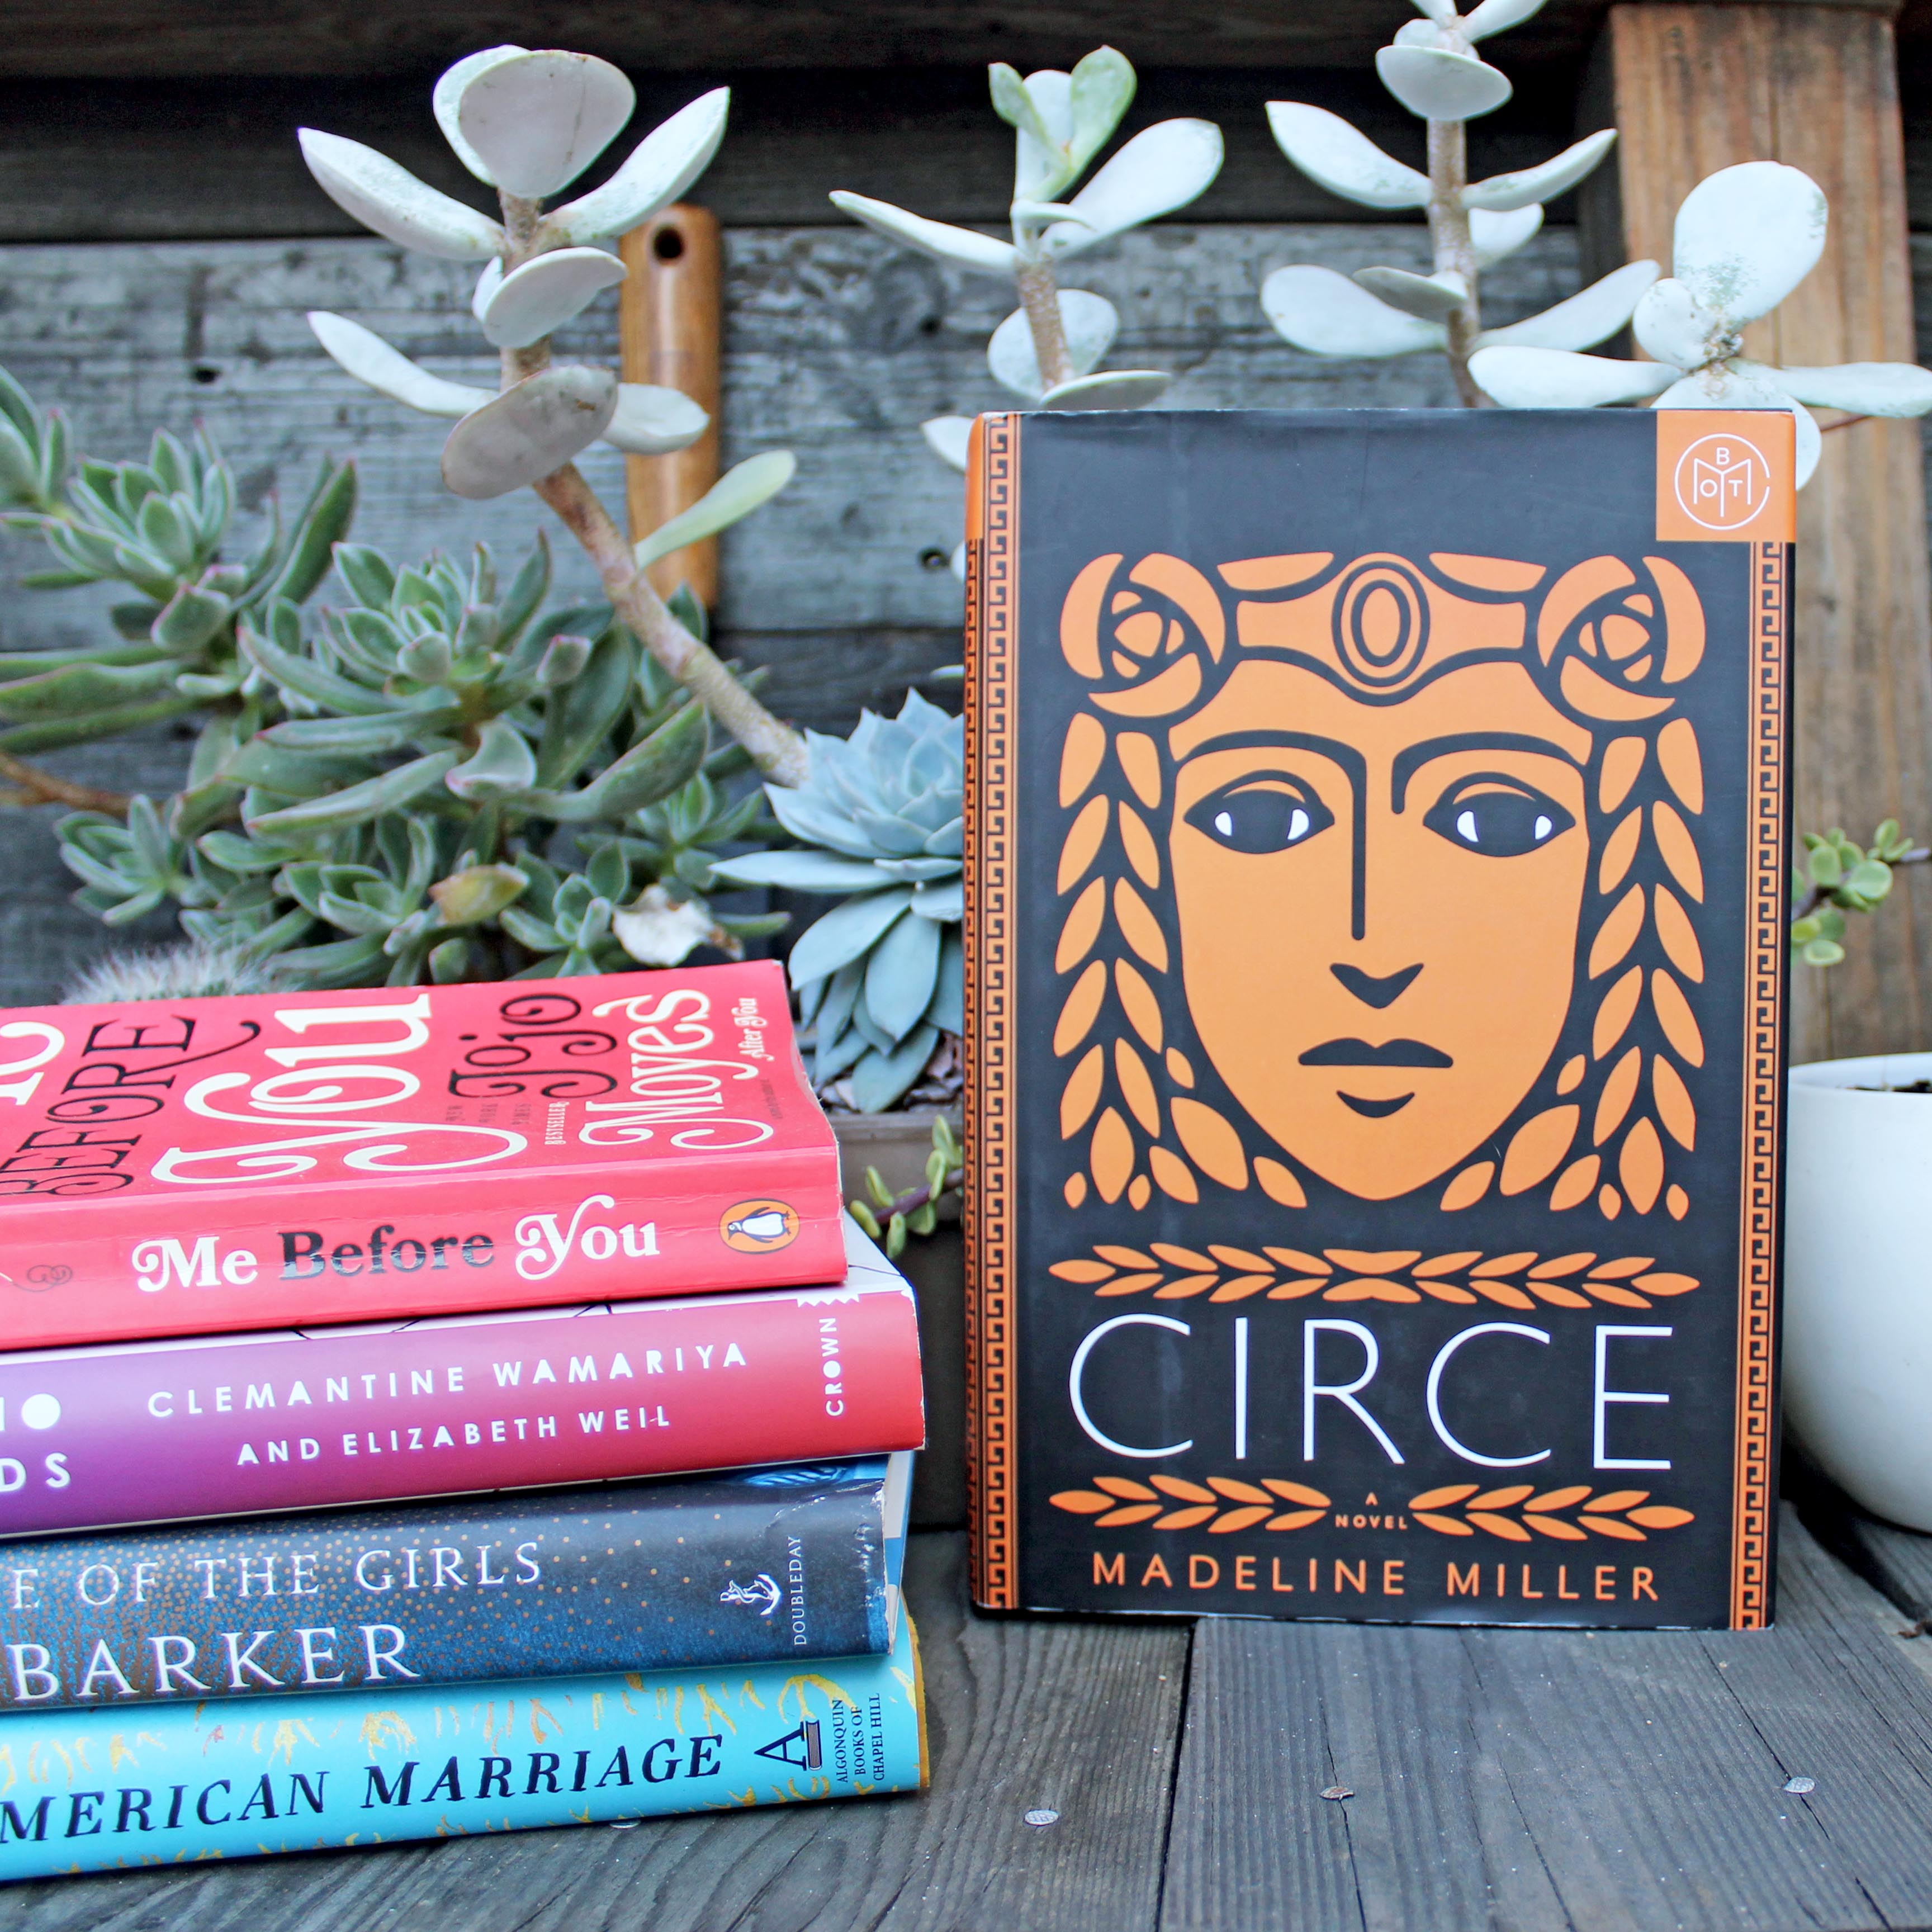 5 Favorite Sewing Projects & Reads "Circe"